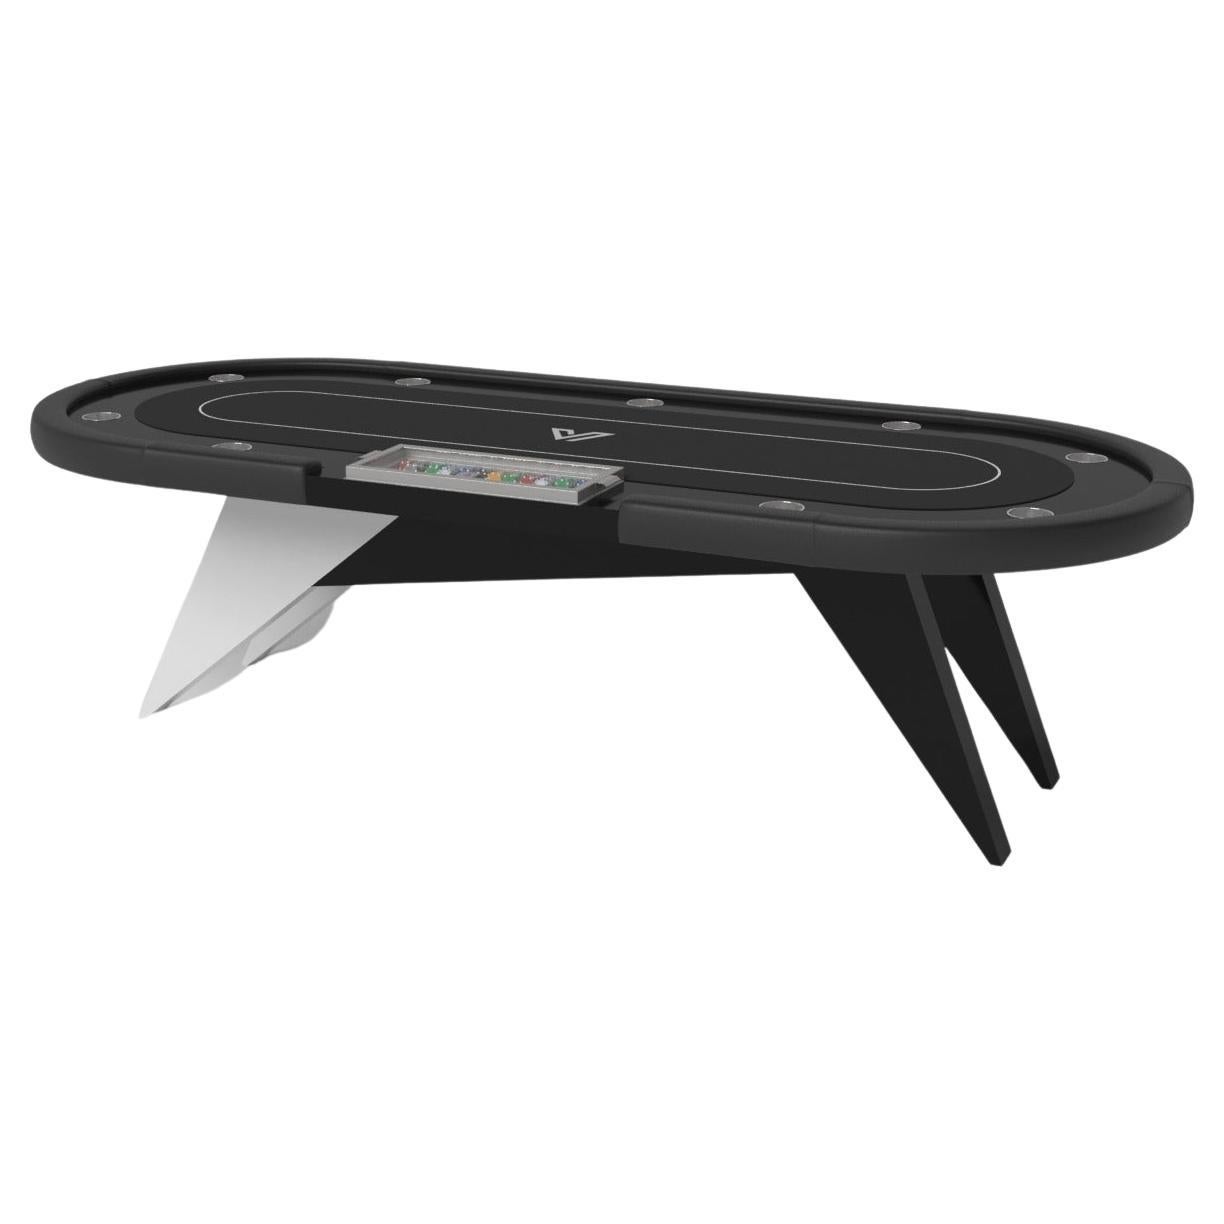 Elevate Customs Mantis Poker Tables / Solid Pantone Black Color in 8'8" - USA For Sale